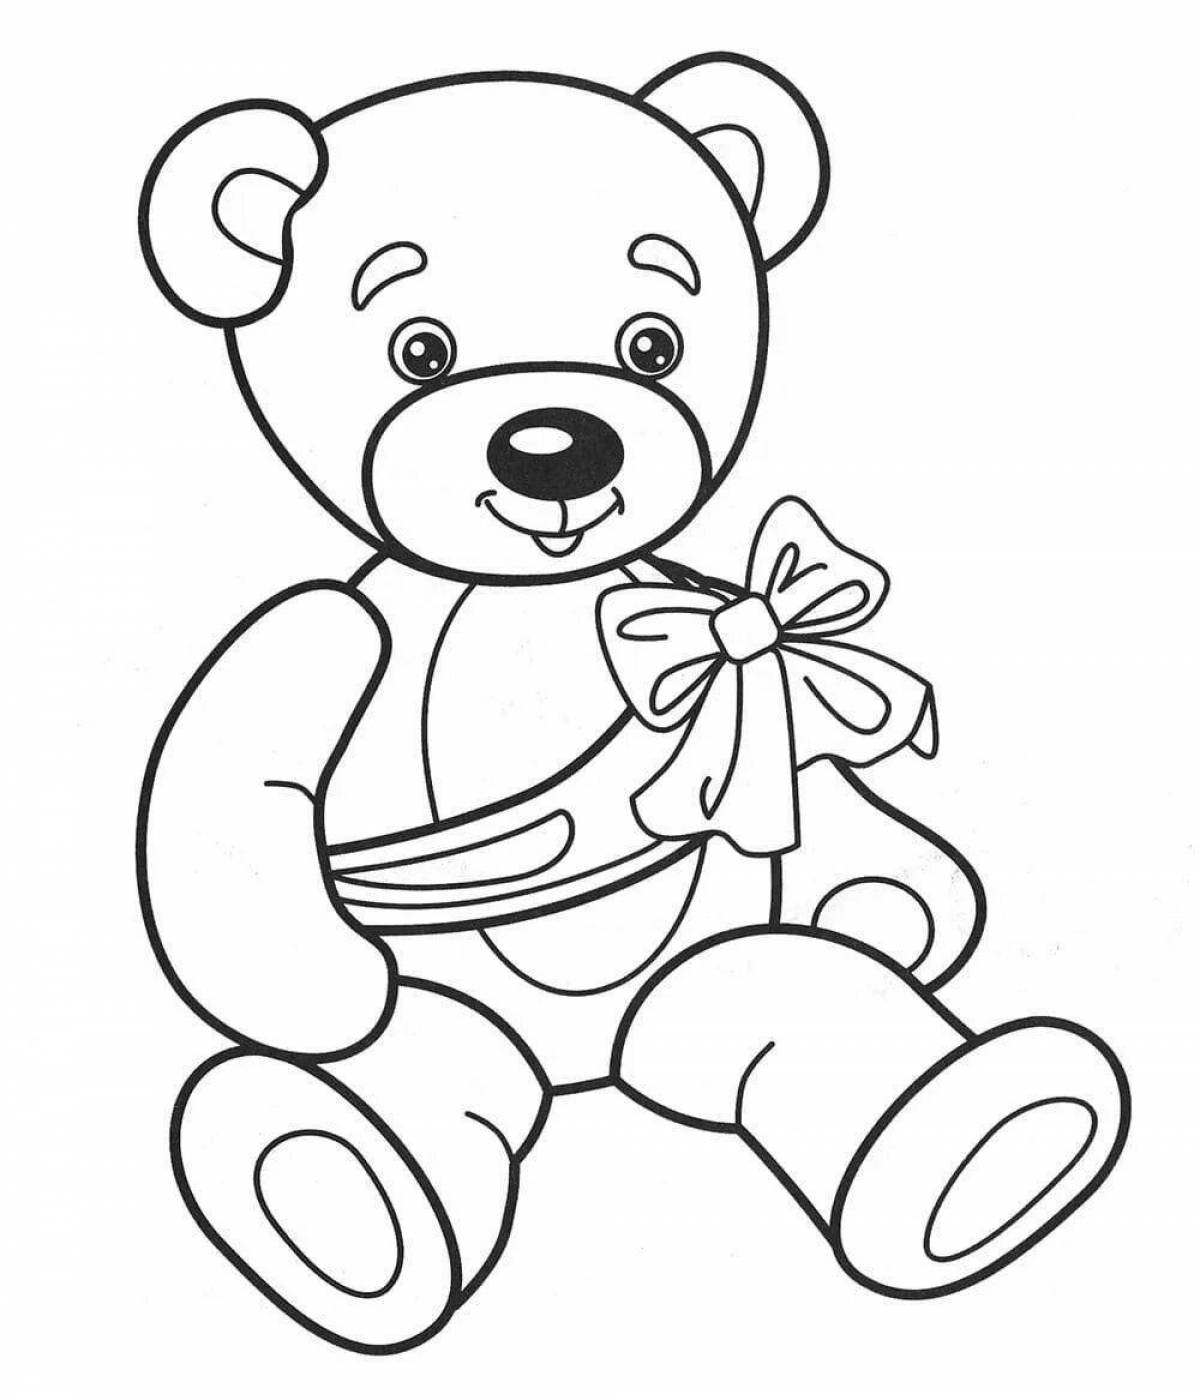 Playful coloring bear for children 4-5 years old